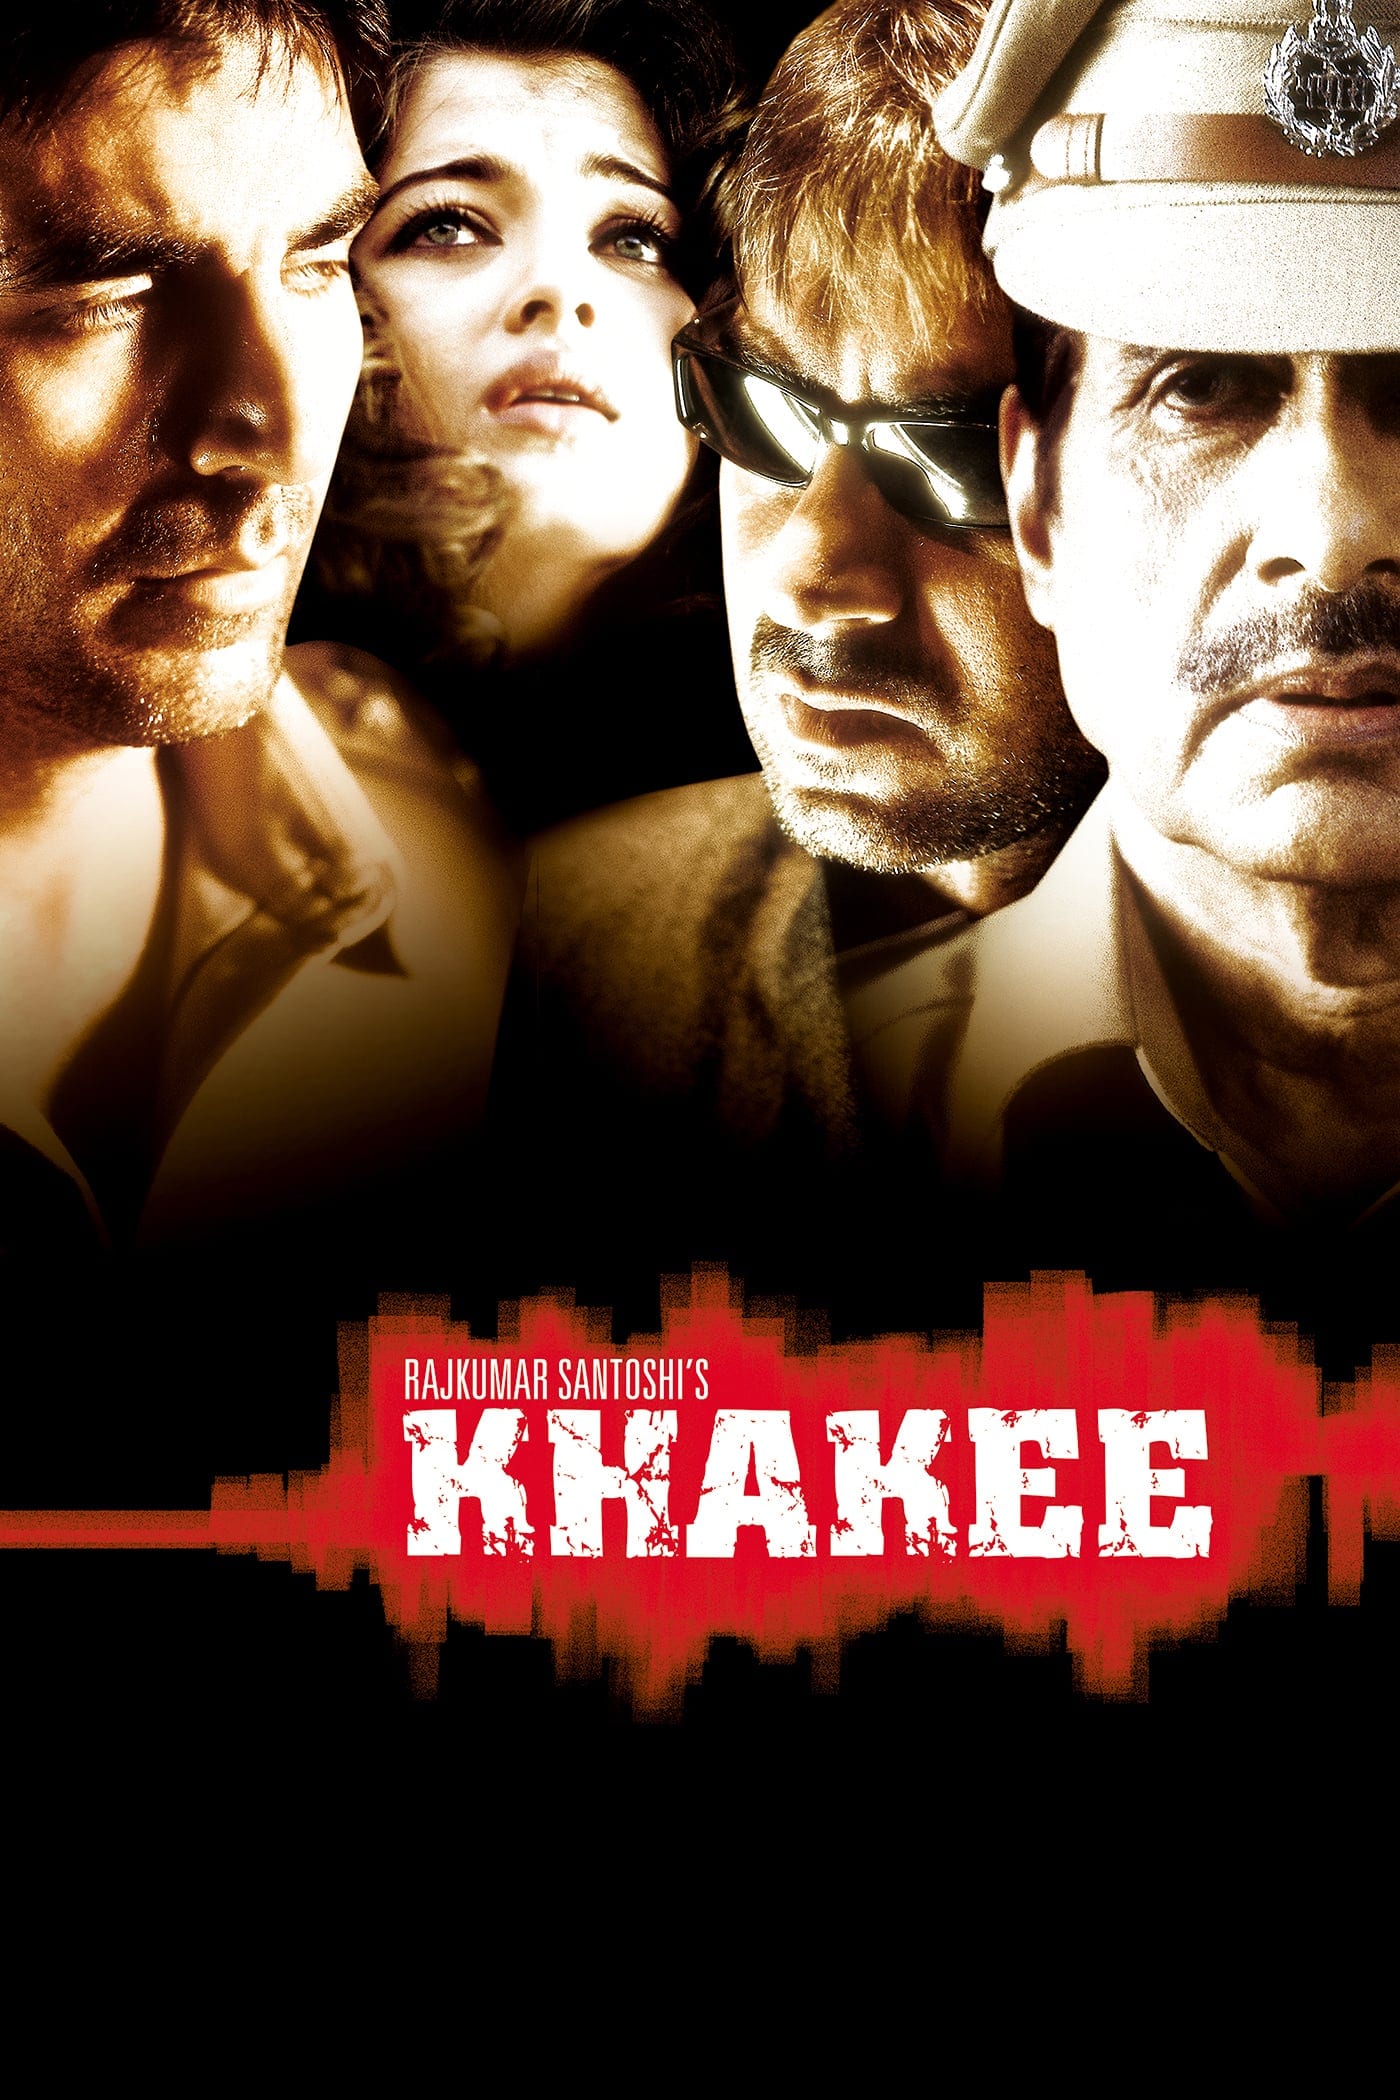 Poster for the movie "Khakee"